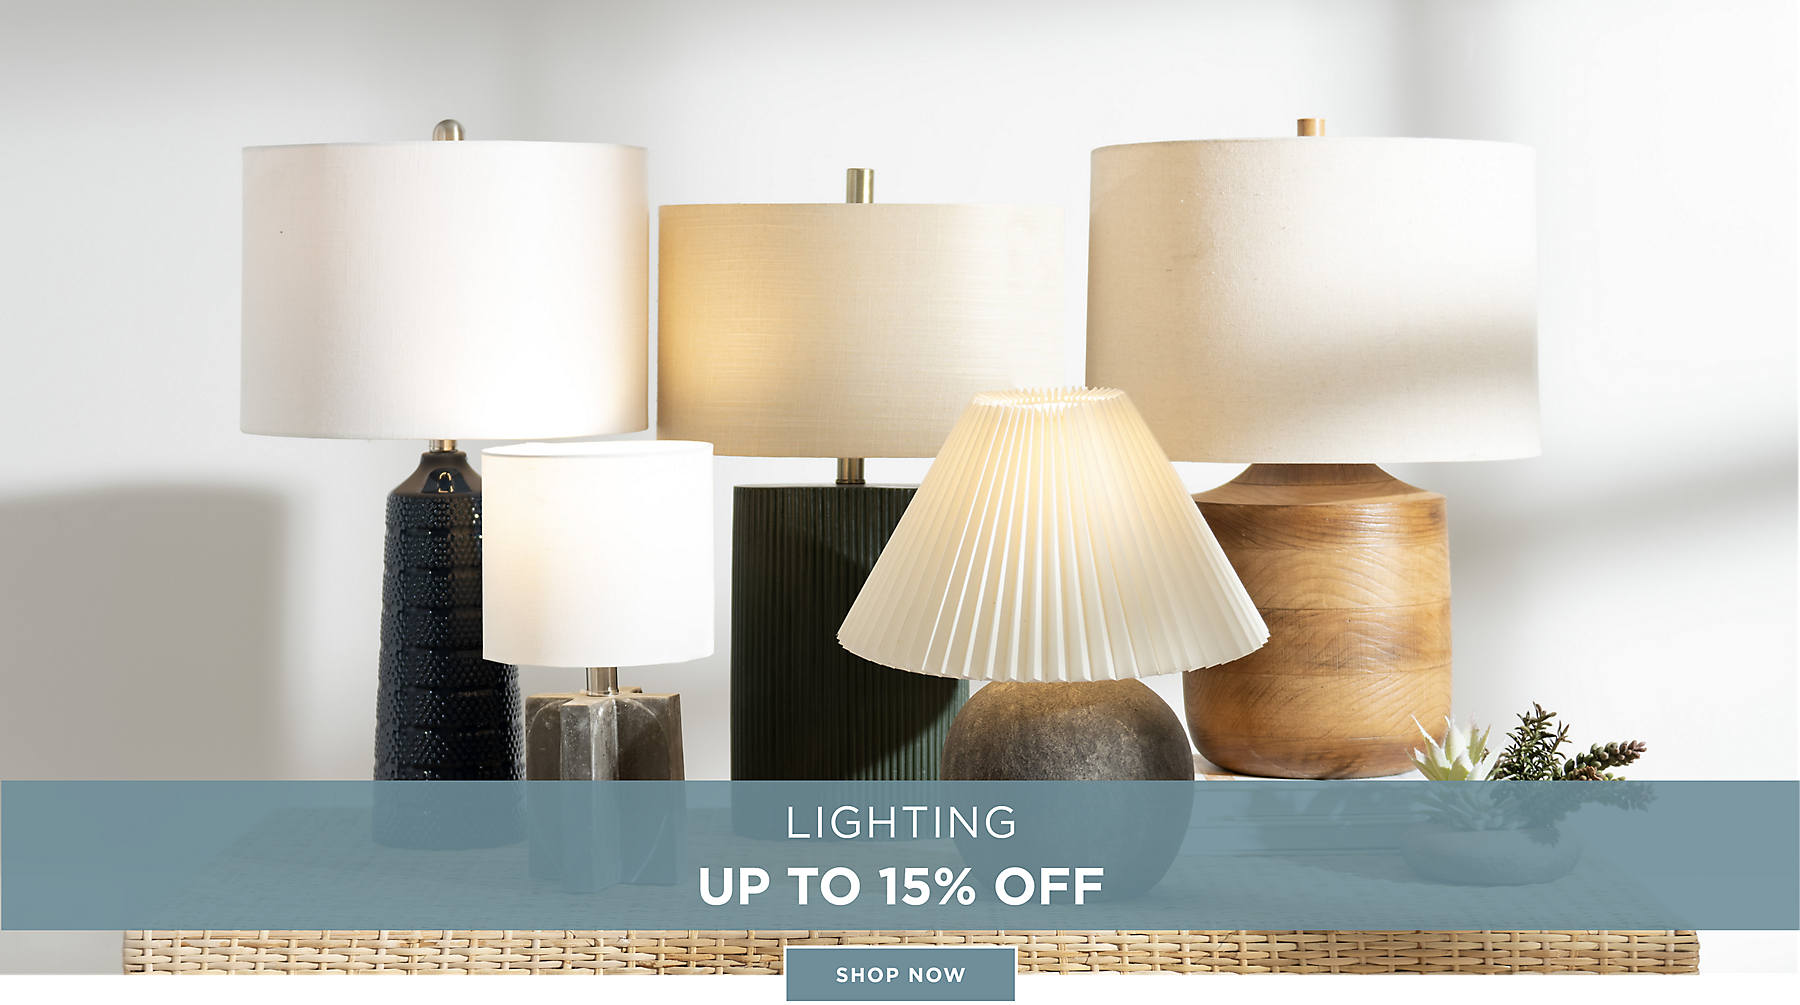 Lighting Up to 15% Off Shop Now